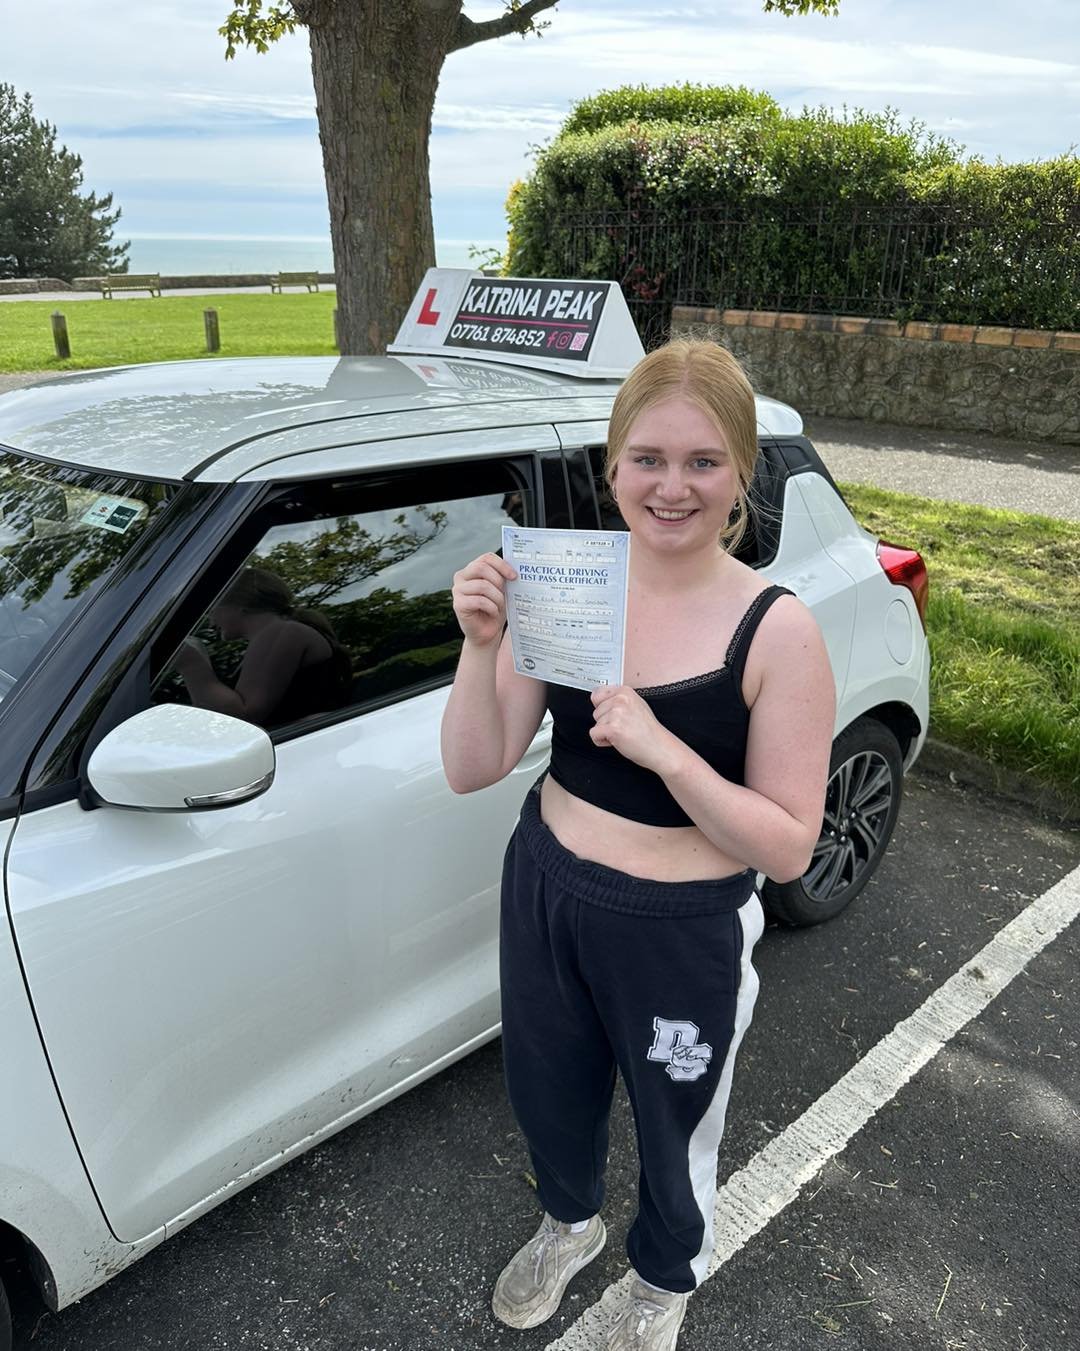 Amazing driving from Ella resulting in a thoroughly well deserved driving test pass! It&rsquo;s been great fun teaching you and I wish you every success Ella! 🥳🎉🚗🚙 #learntodrive #passyourdrivingtest #folkestone #katrinapeakdrivingschool